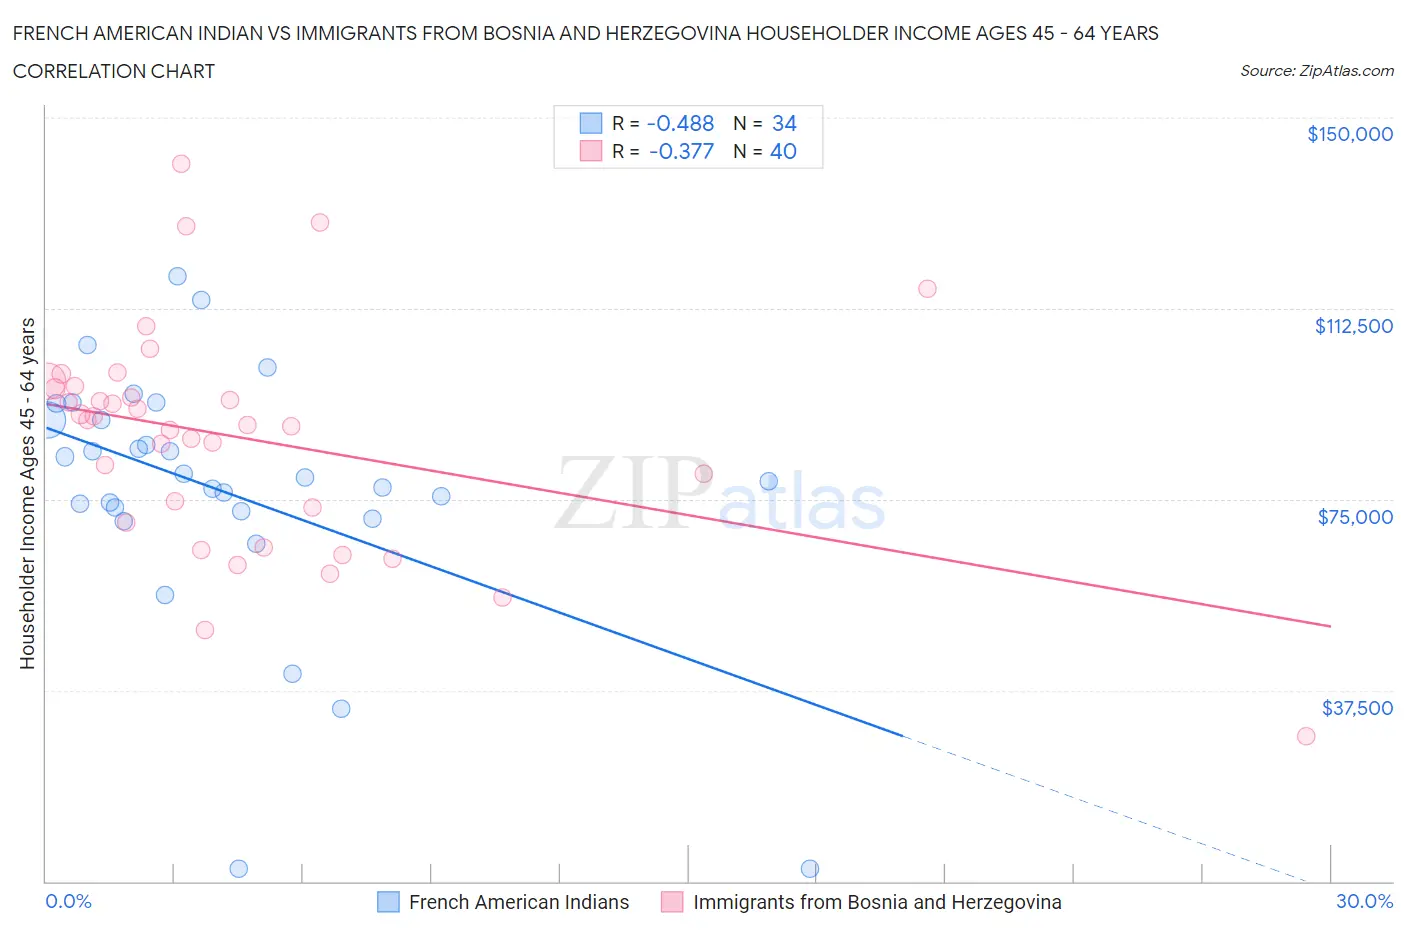 French American Indian vs Immigrants from Bosnia and Herzegovina Householder Income Ages 45 - 64 years